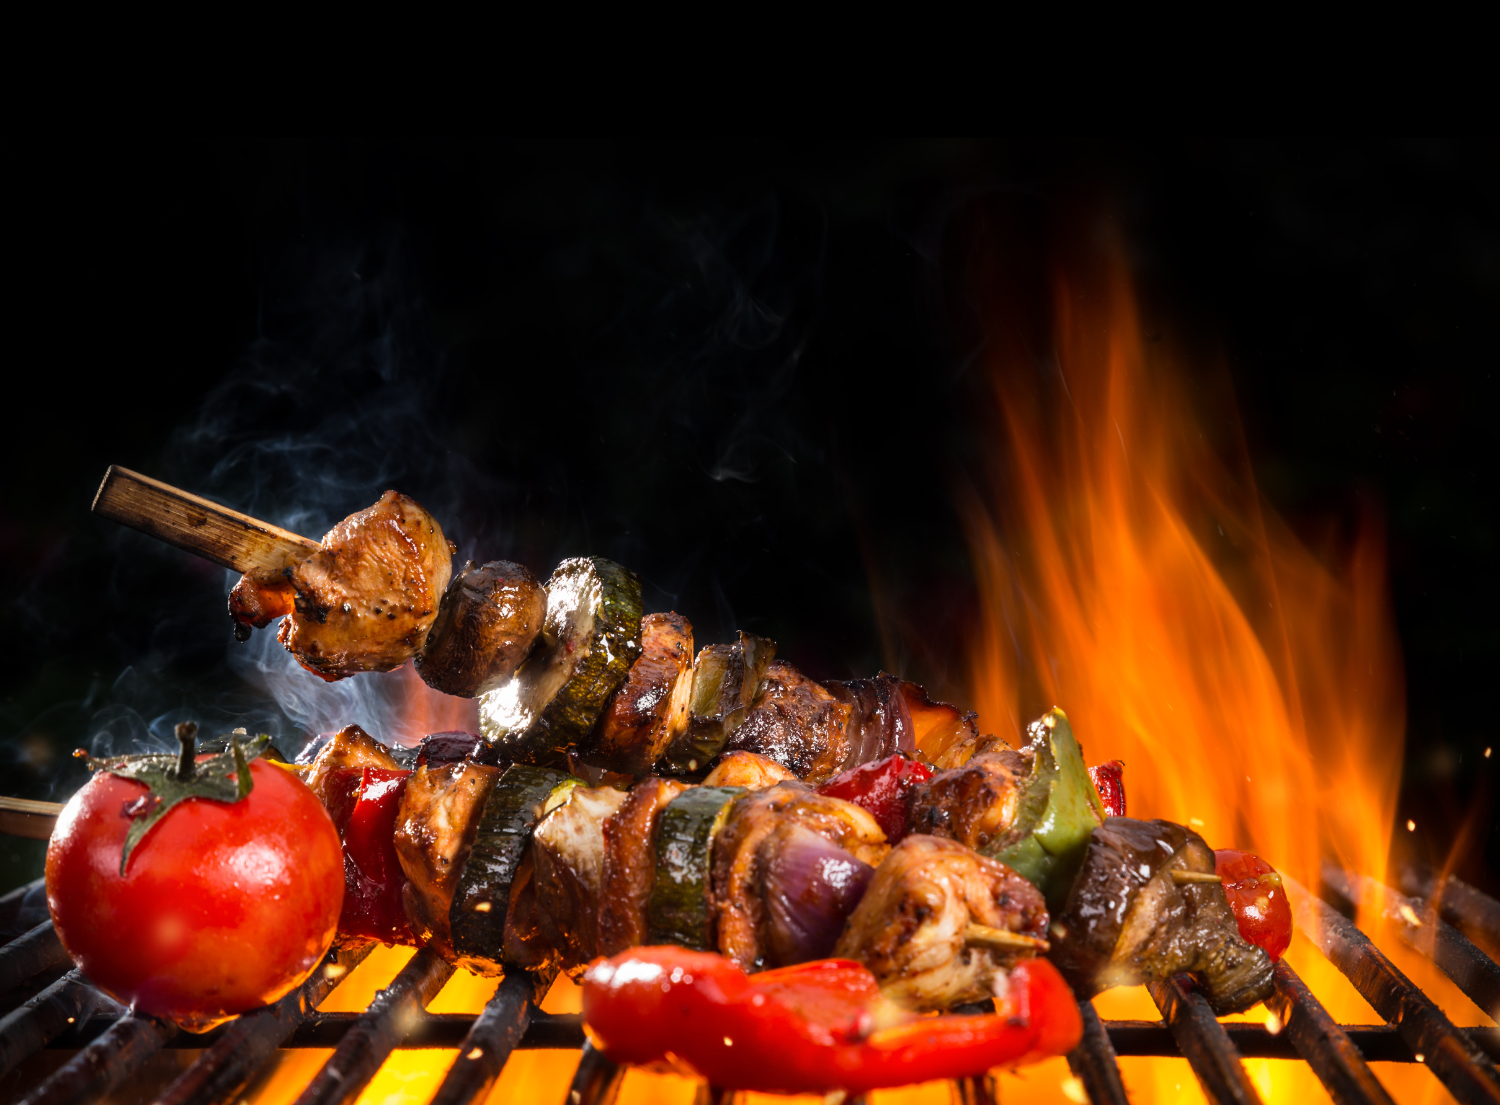 Beef kabobs grilling on bbq with tomato